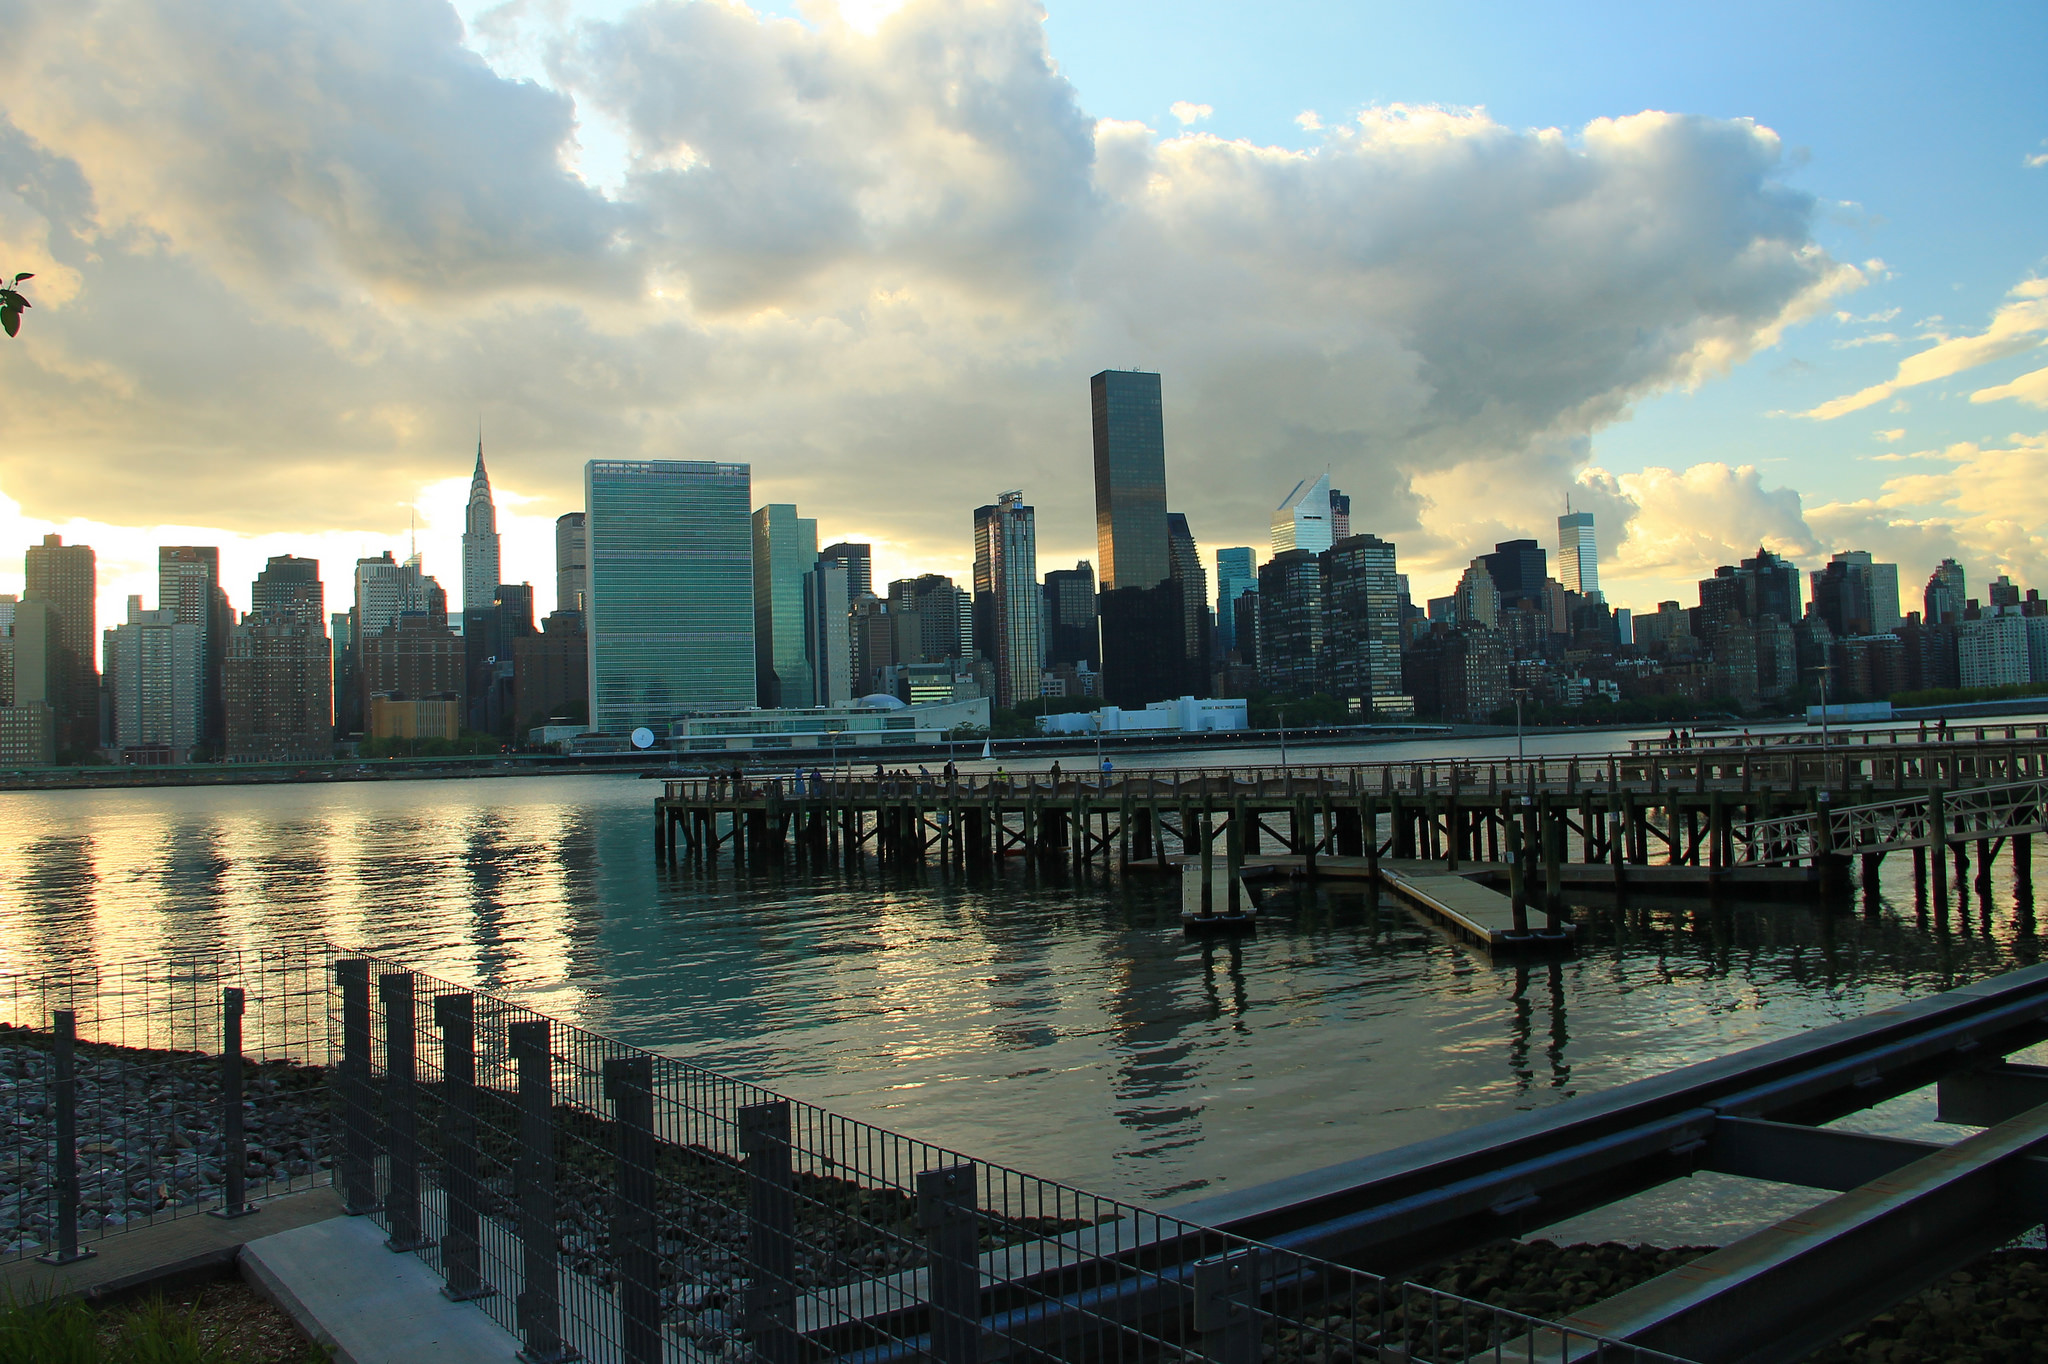 EASt RIVER